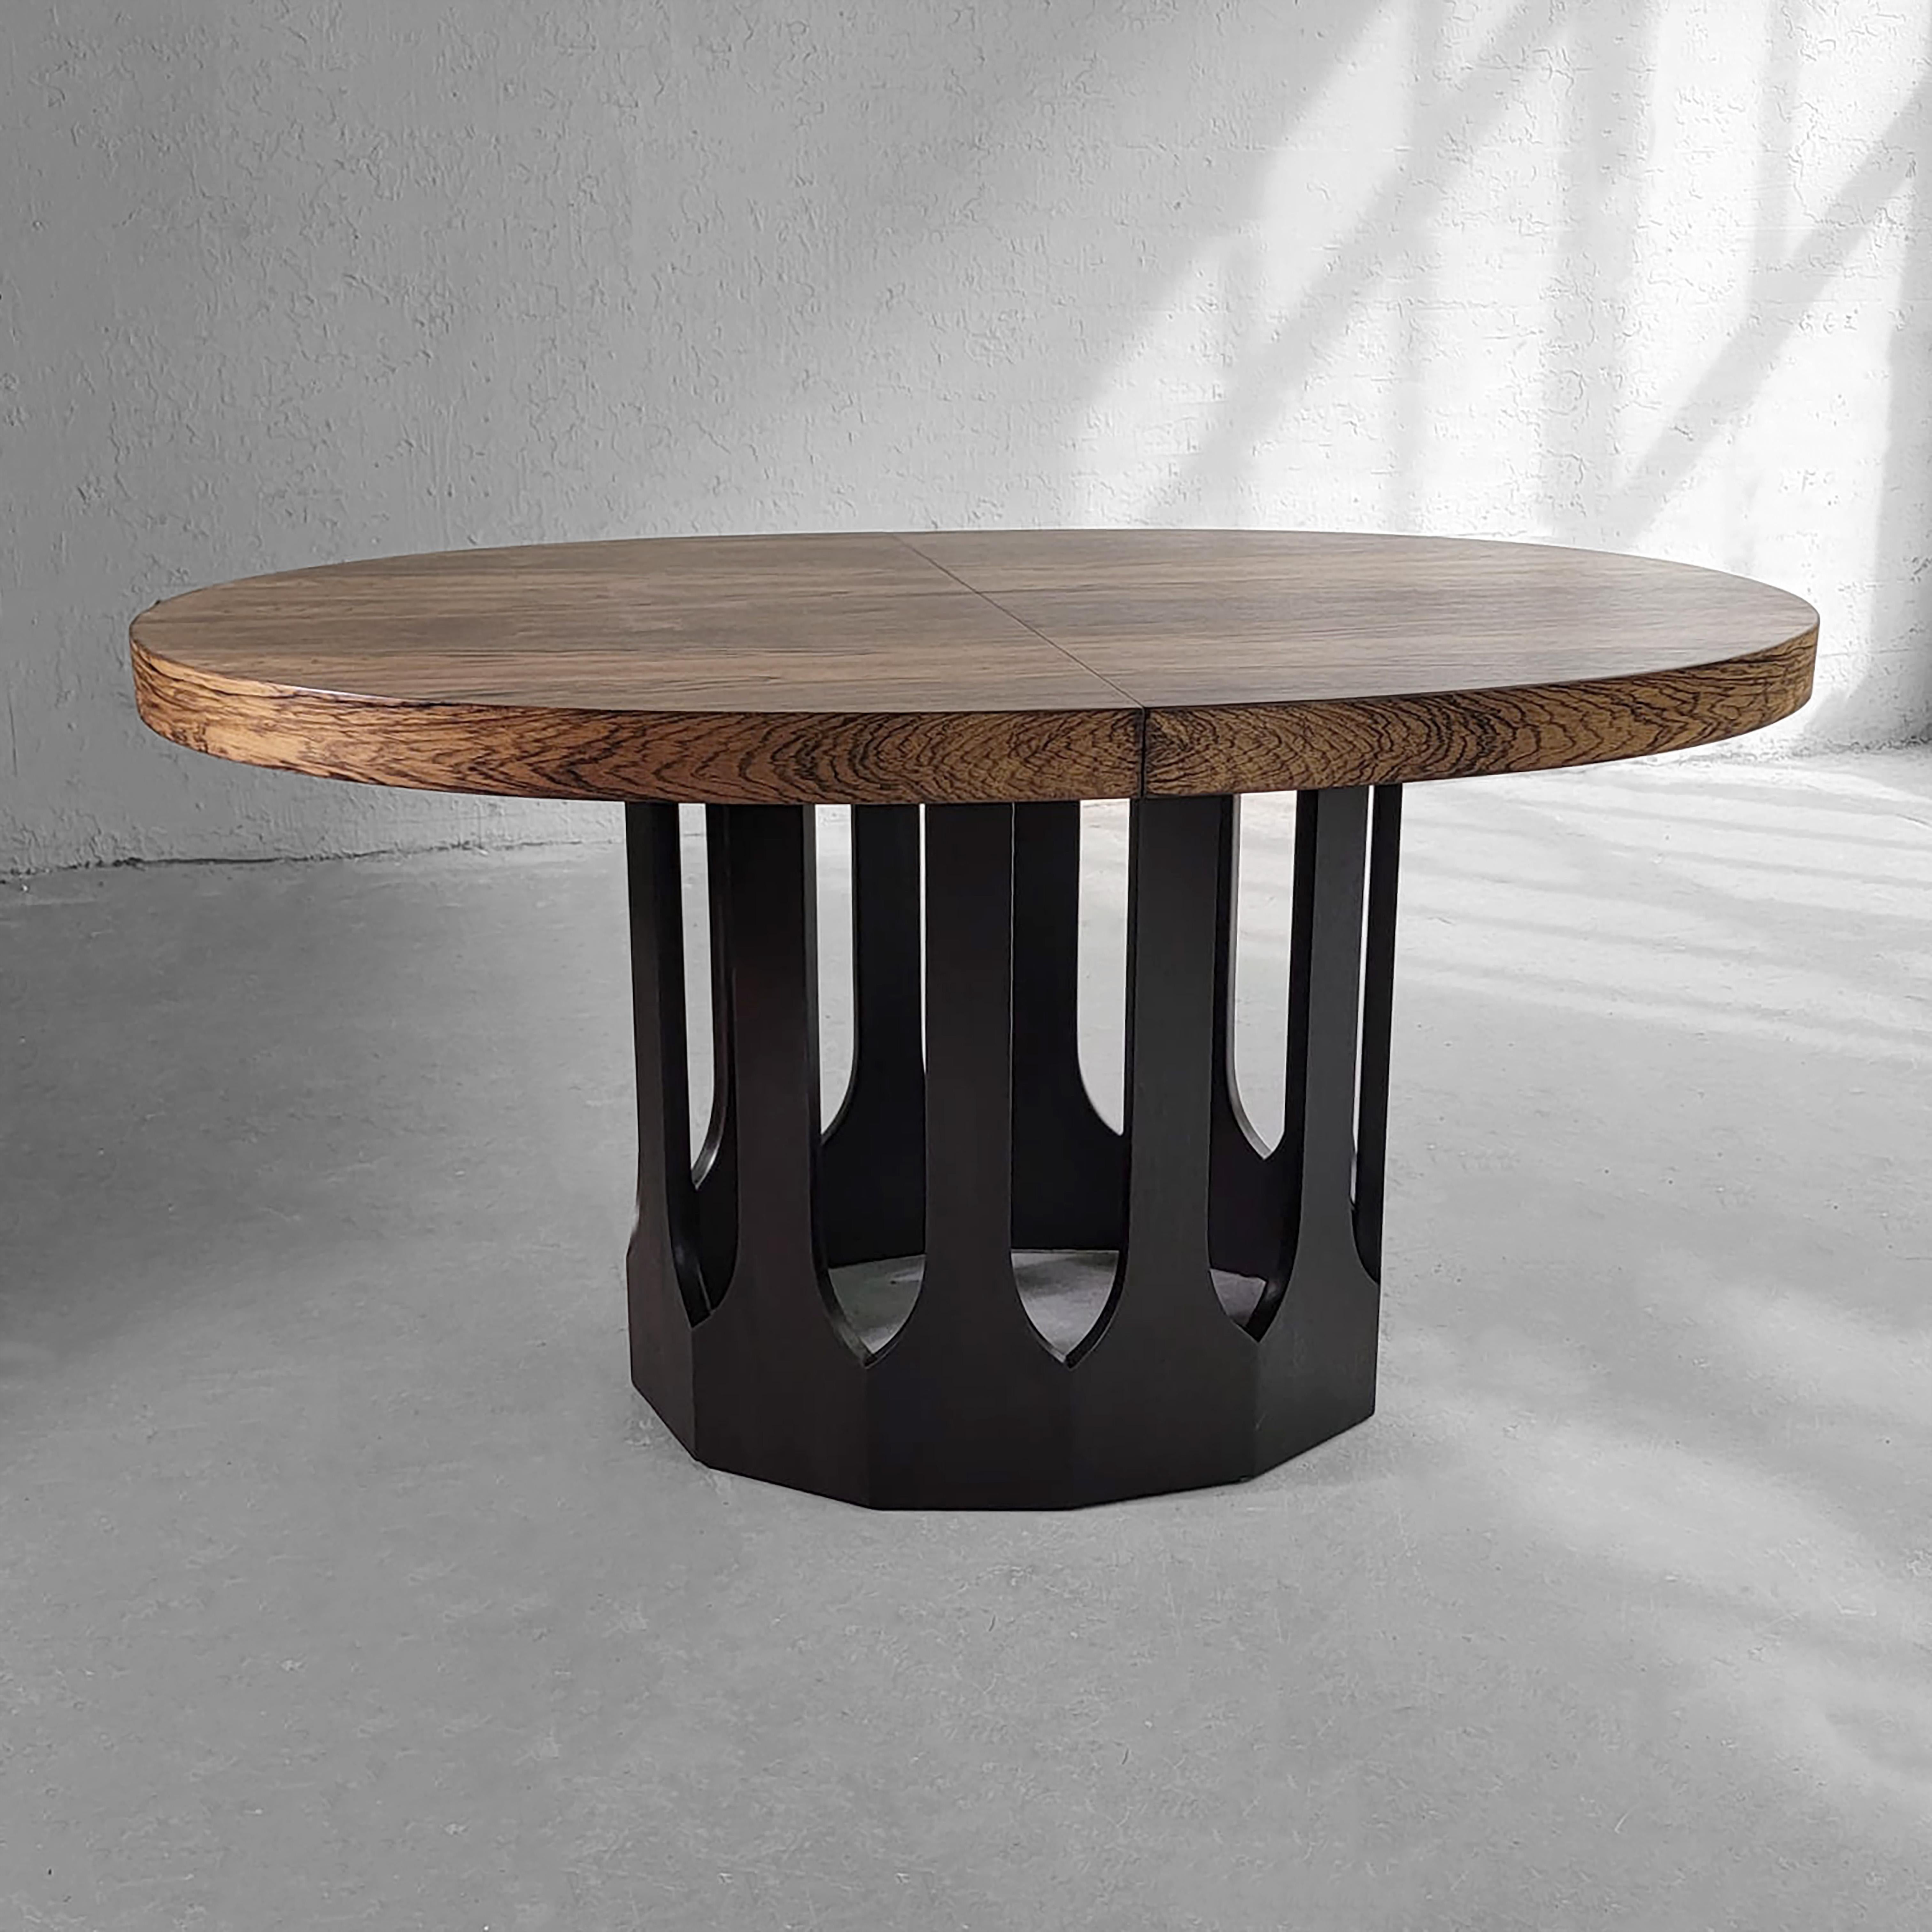 20th Century Harvey Probber Oval Rosewood Extension Dining Table With Cut-Out Base